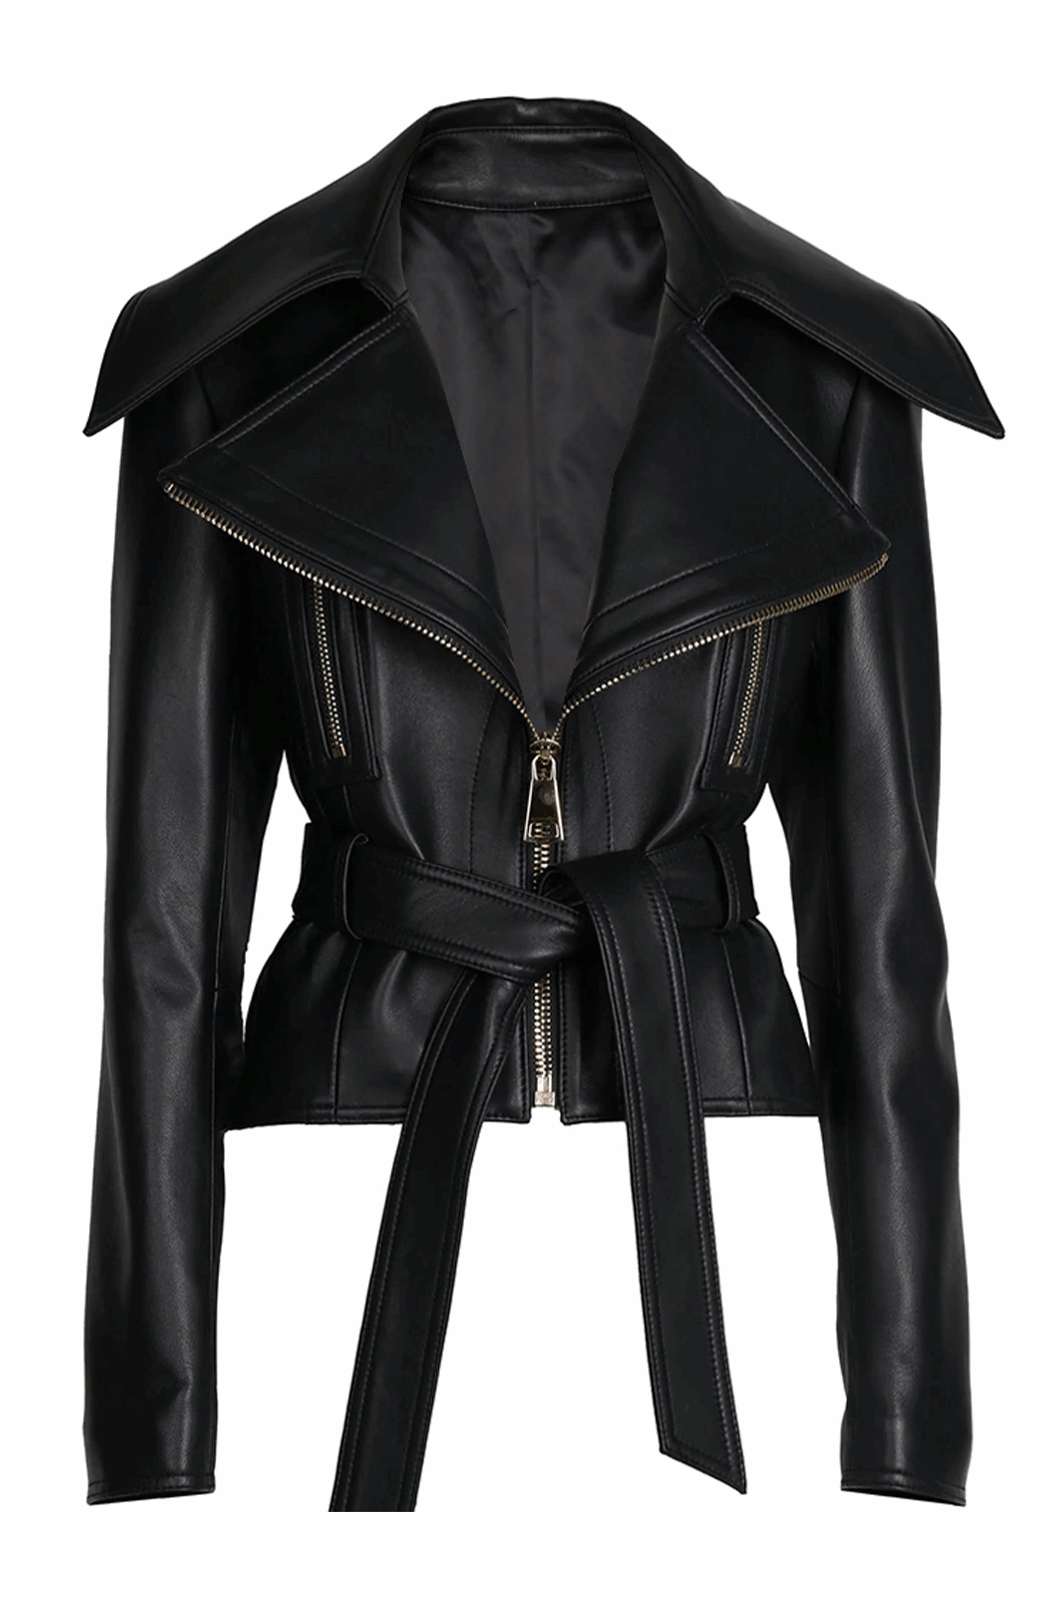 Fitted black leather jacket